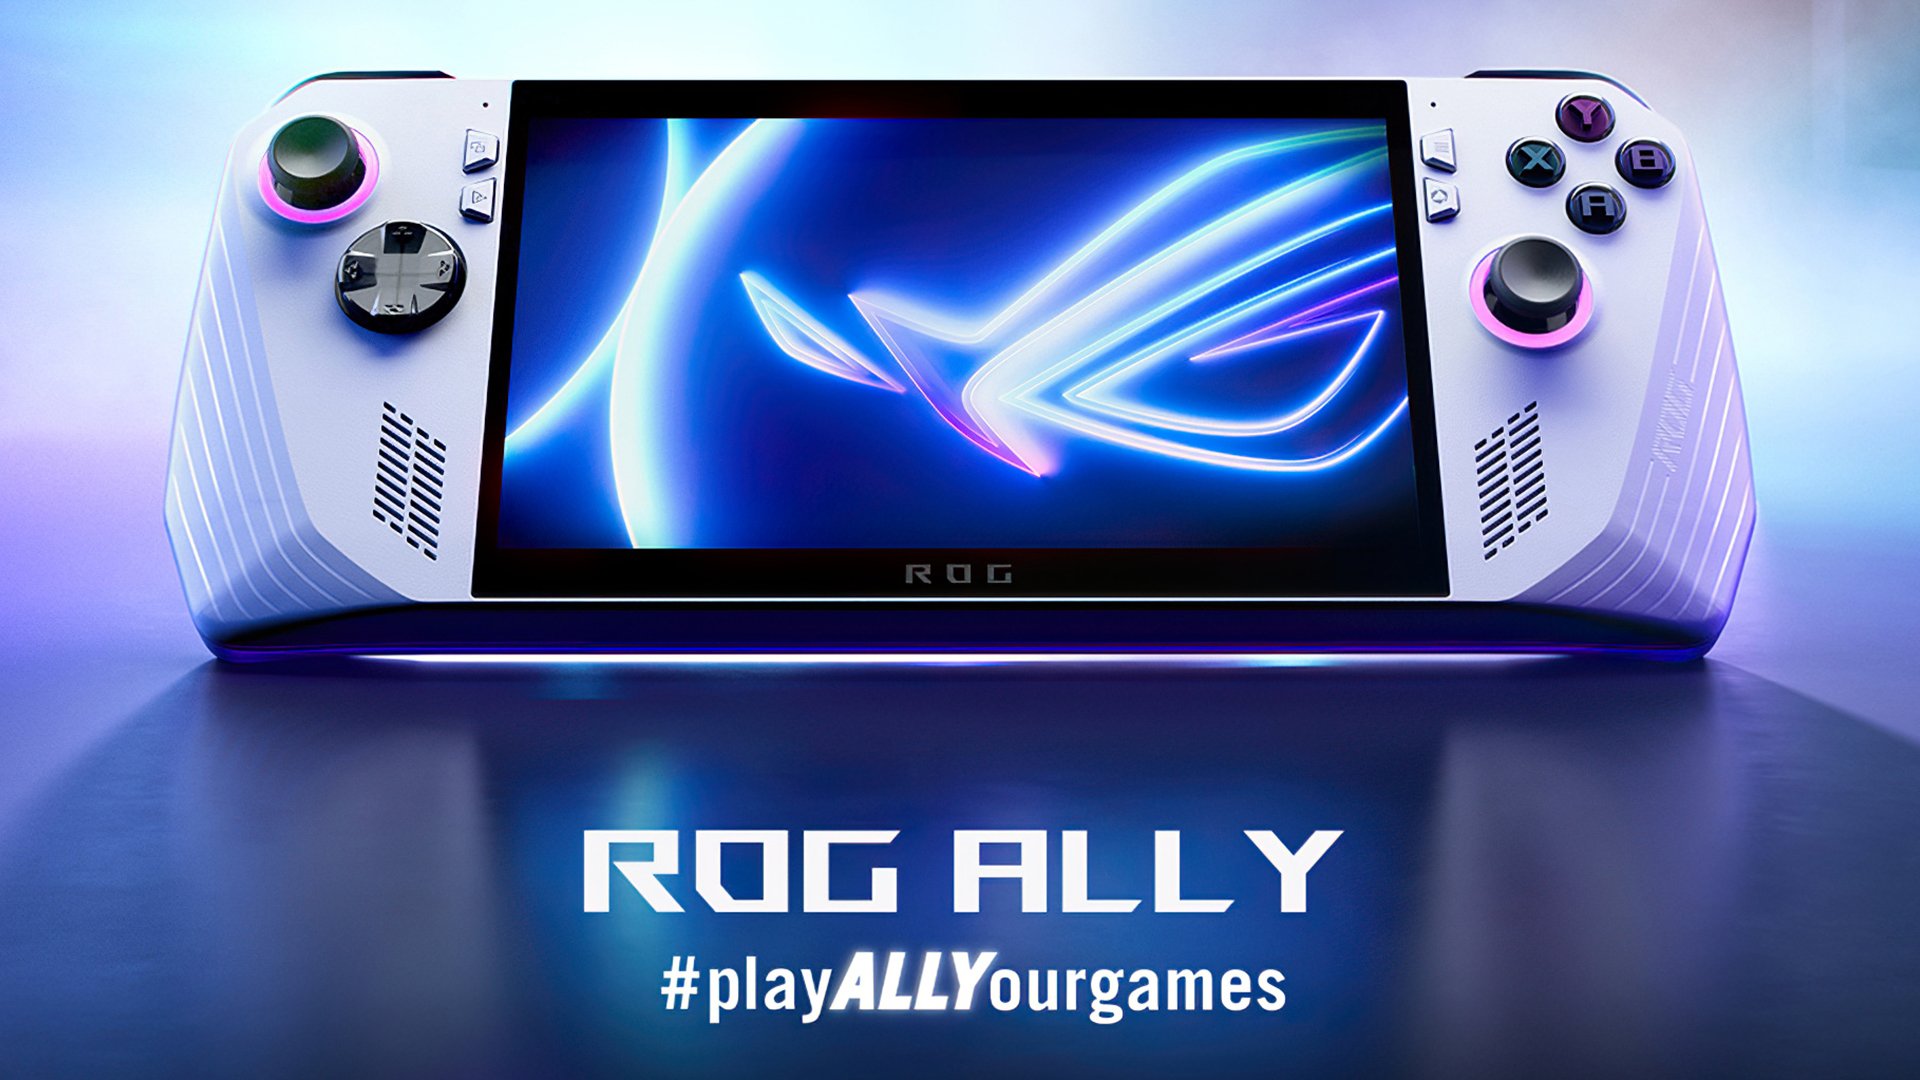 So will the Asus rog ally compete with the steam deck : r/pcmasterrace